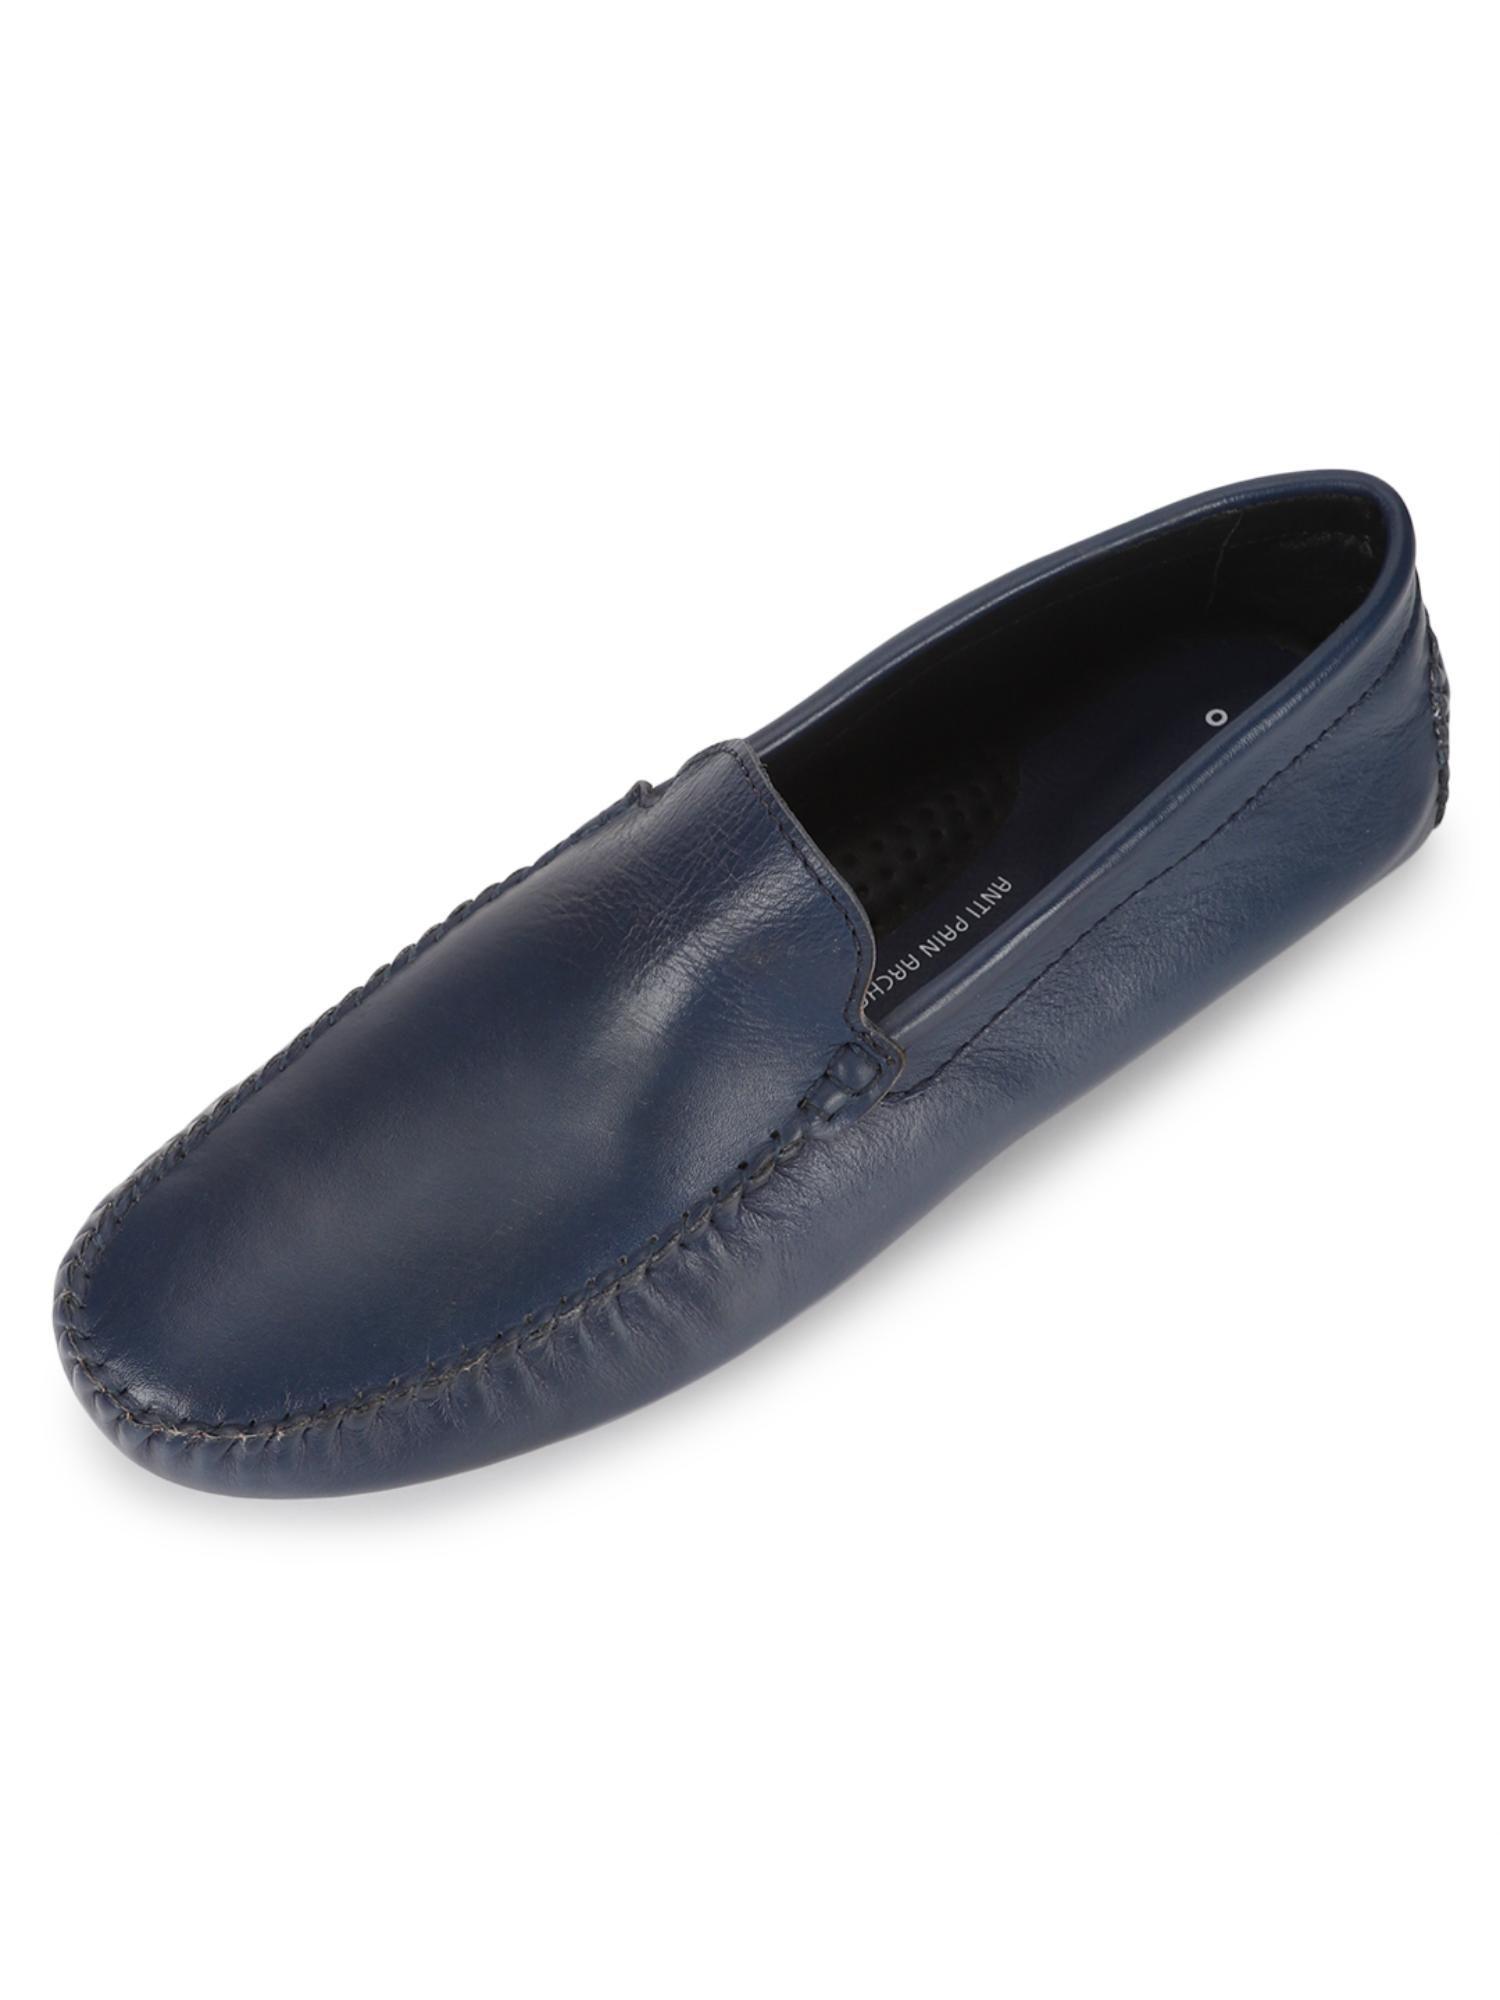 loafer for men arch support premium buttery leather